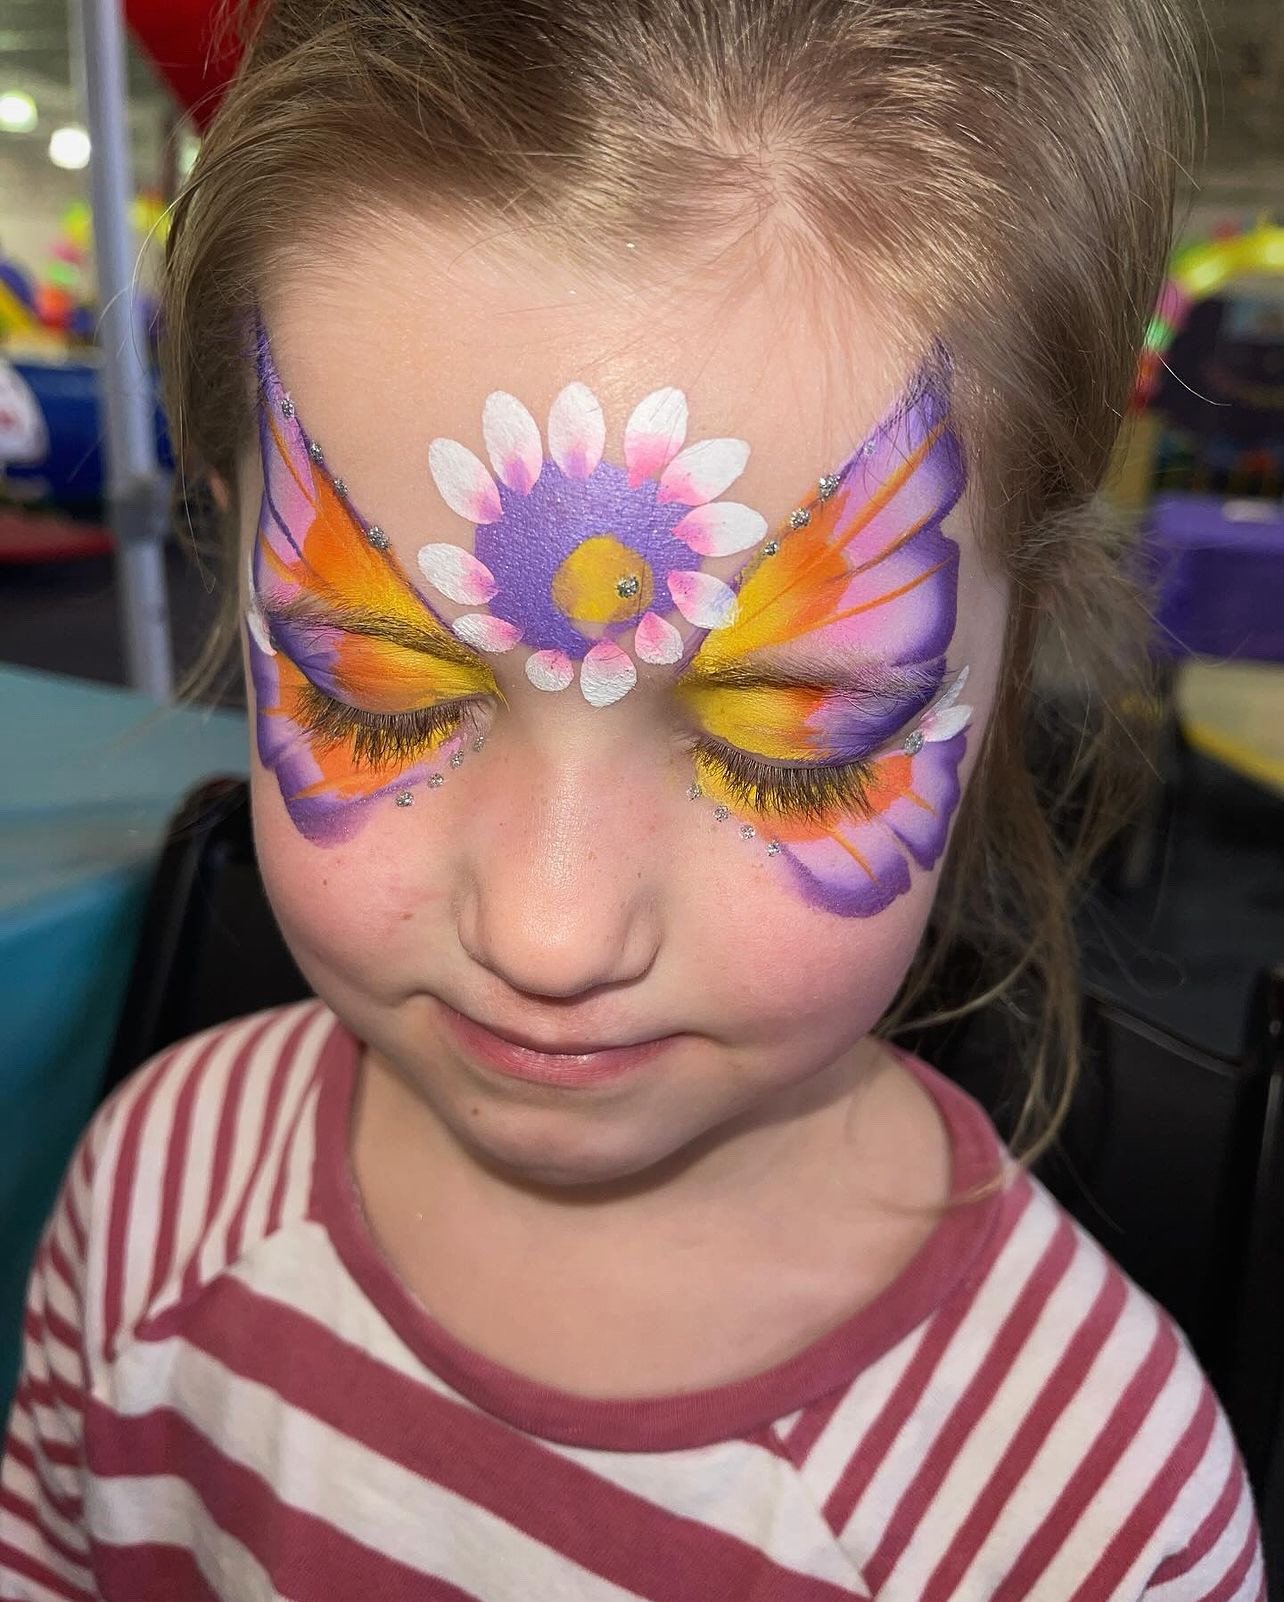  A child with their face painted in a butterfly pattern 